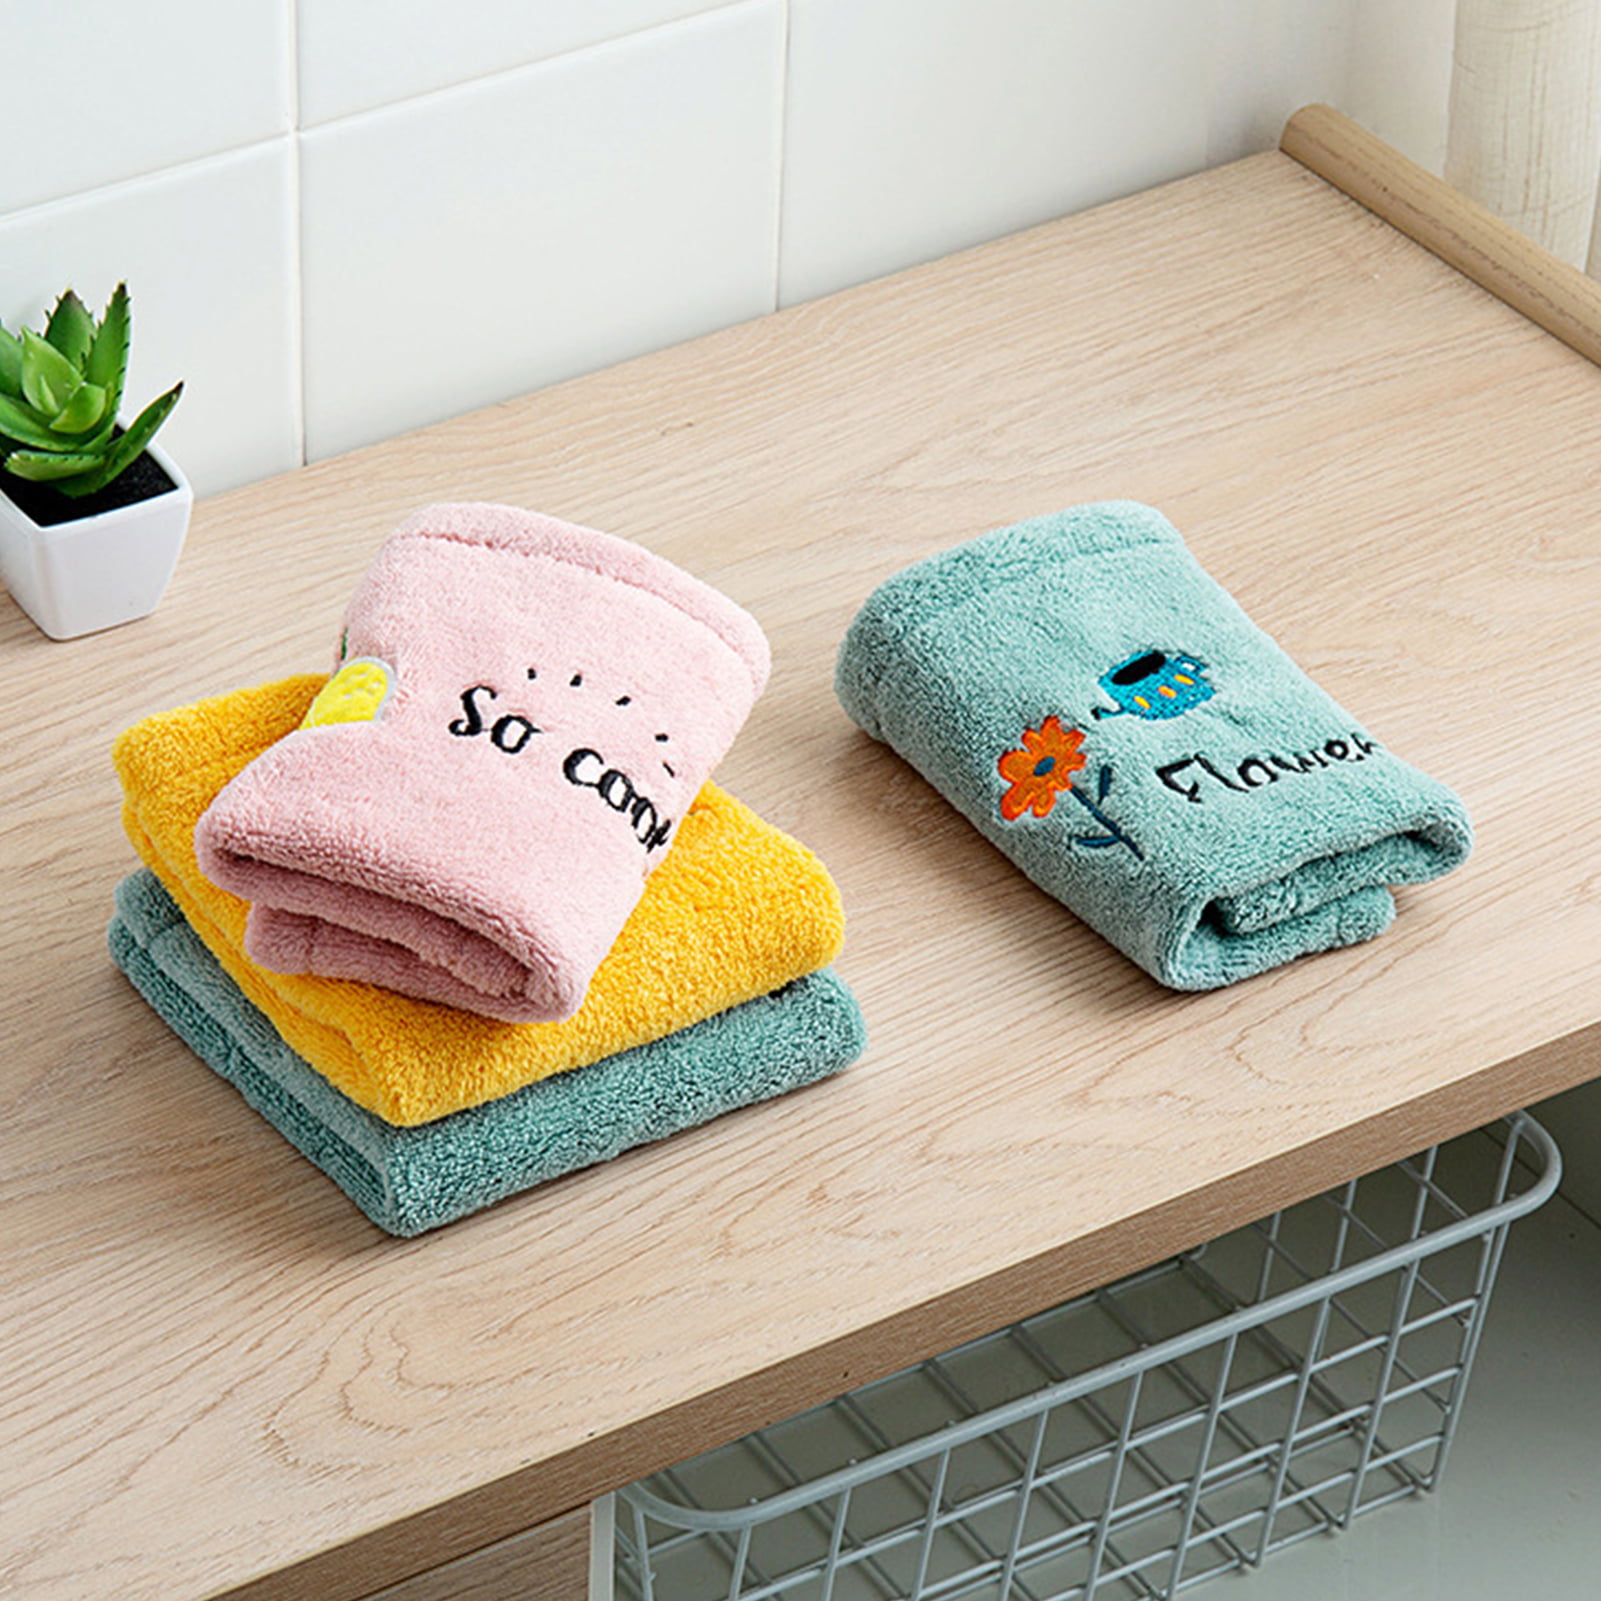 Ewanda Store 3 Pack Cute Hand Towels,Hand Towels with Hanging Loop,Kids Hanging Hand Towels for Kitchen Bathroom Home